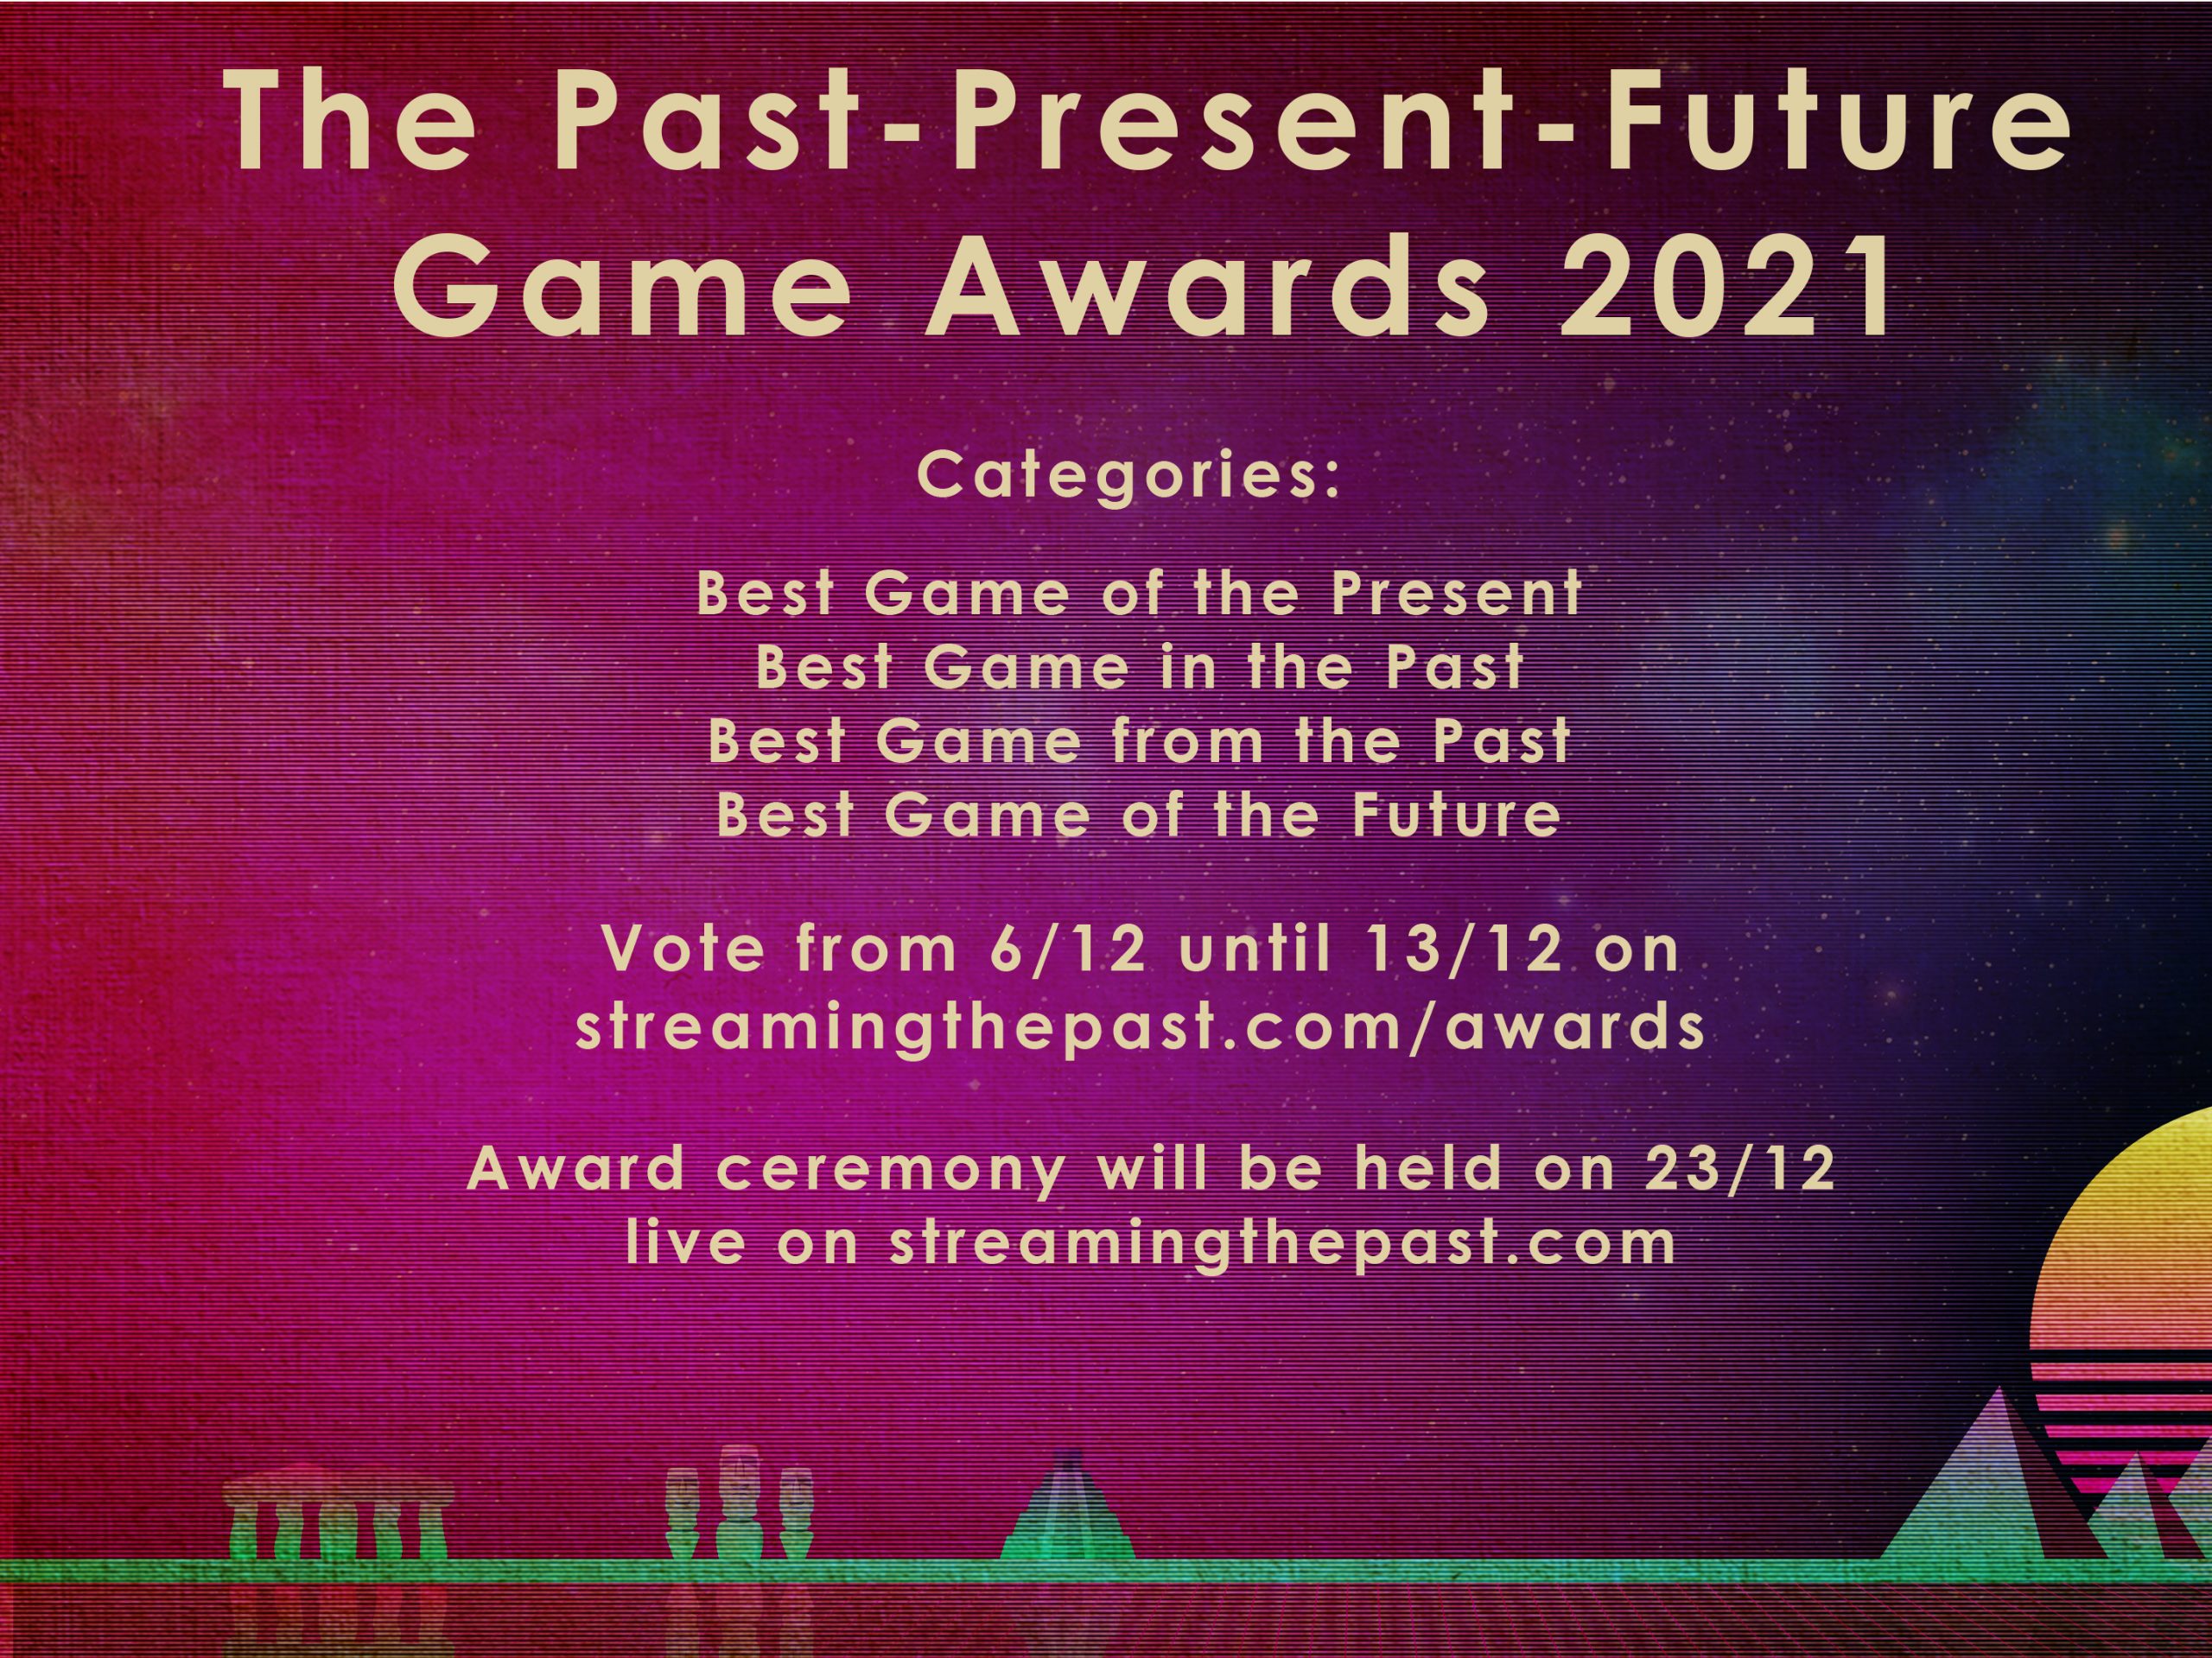 The Past-Present-Future Game Awards 2021!